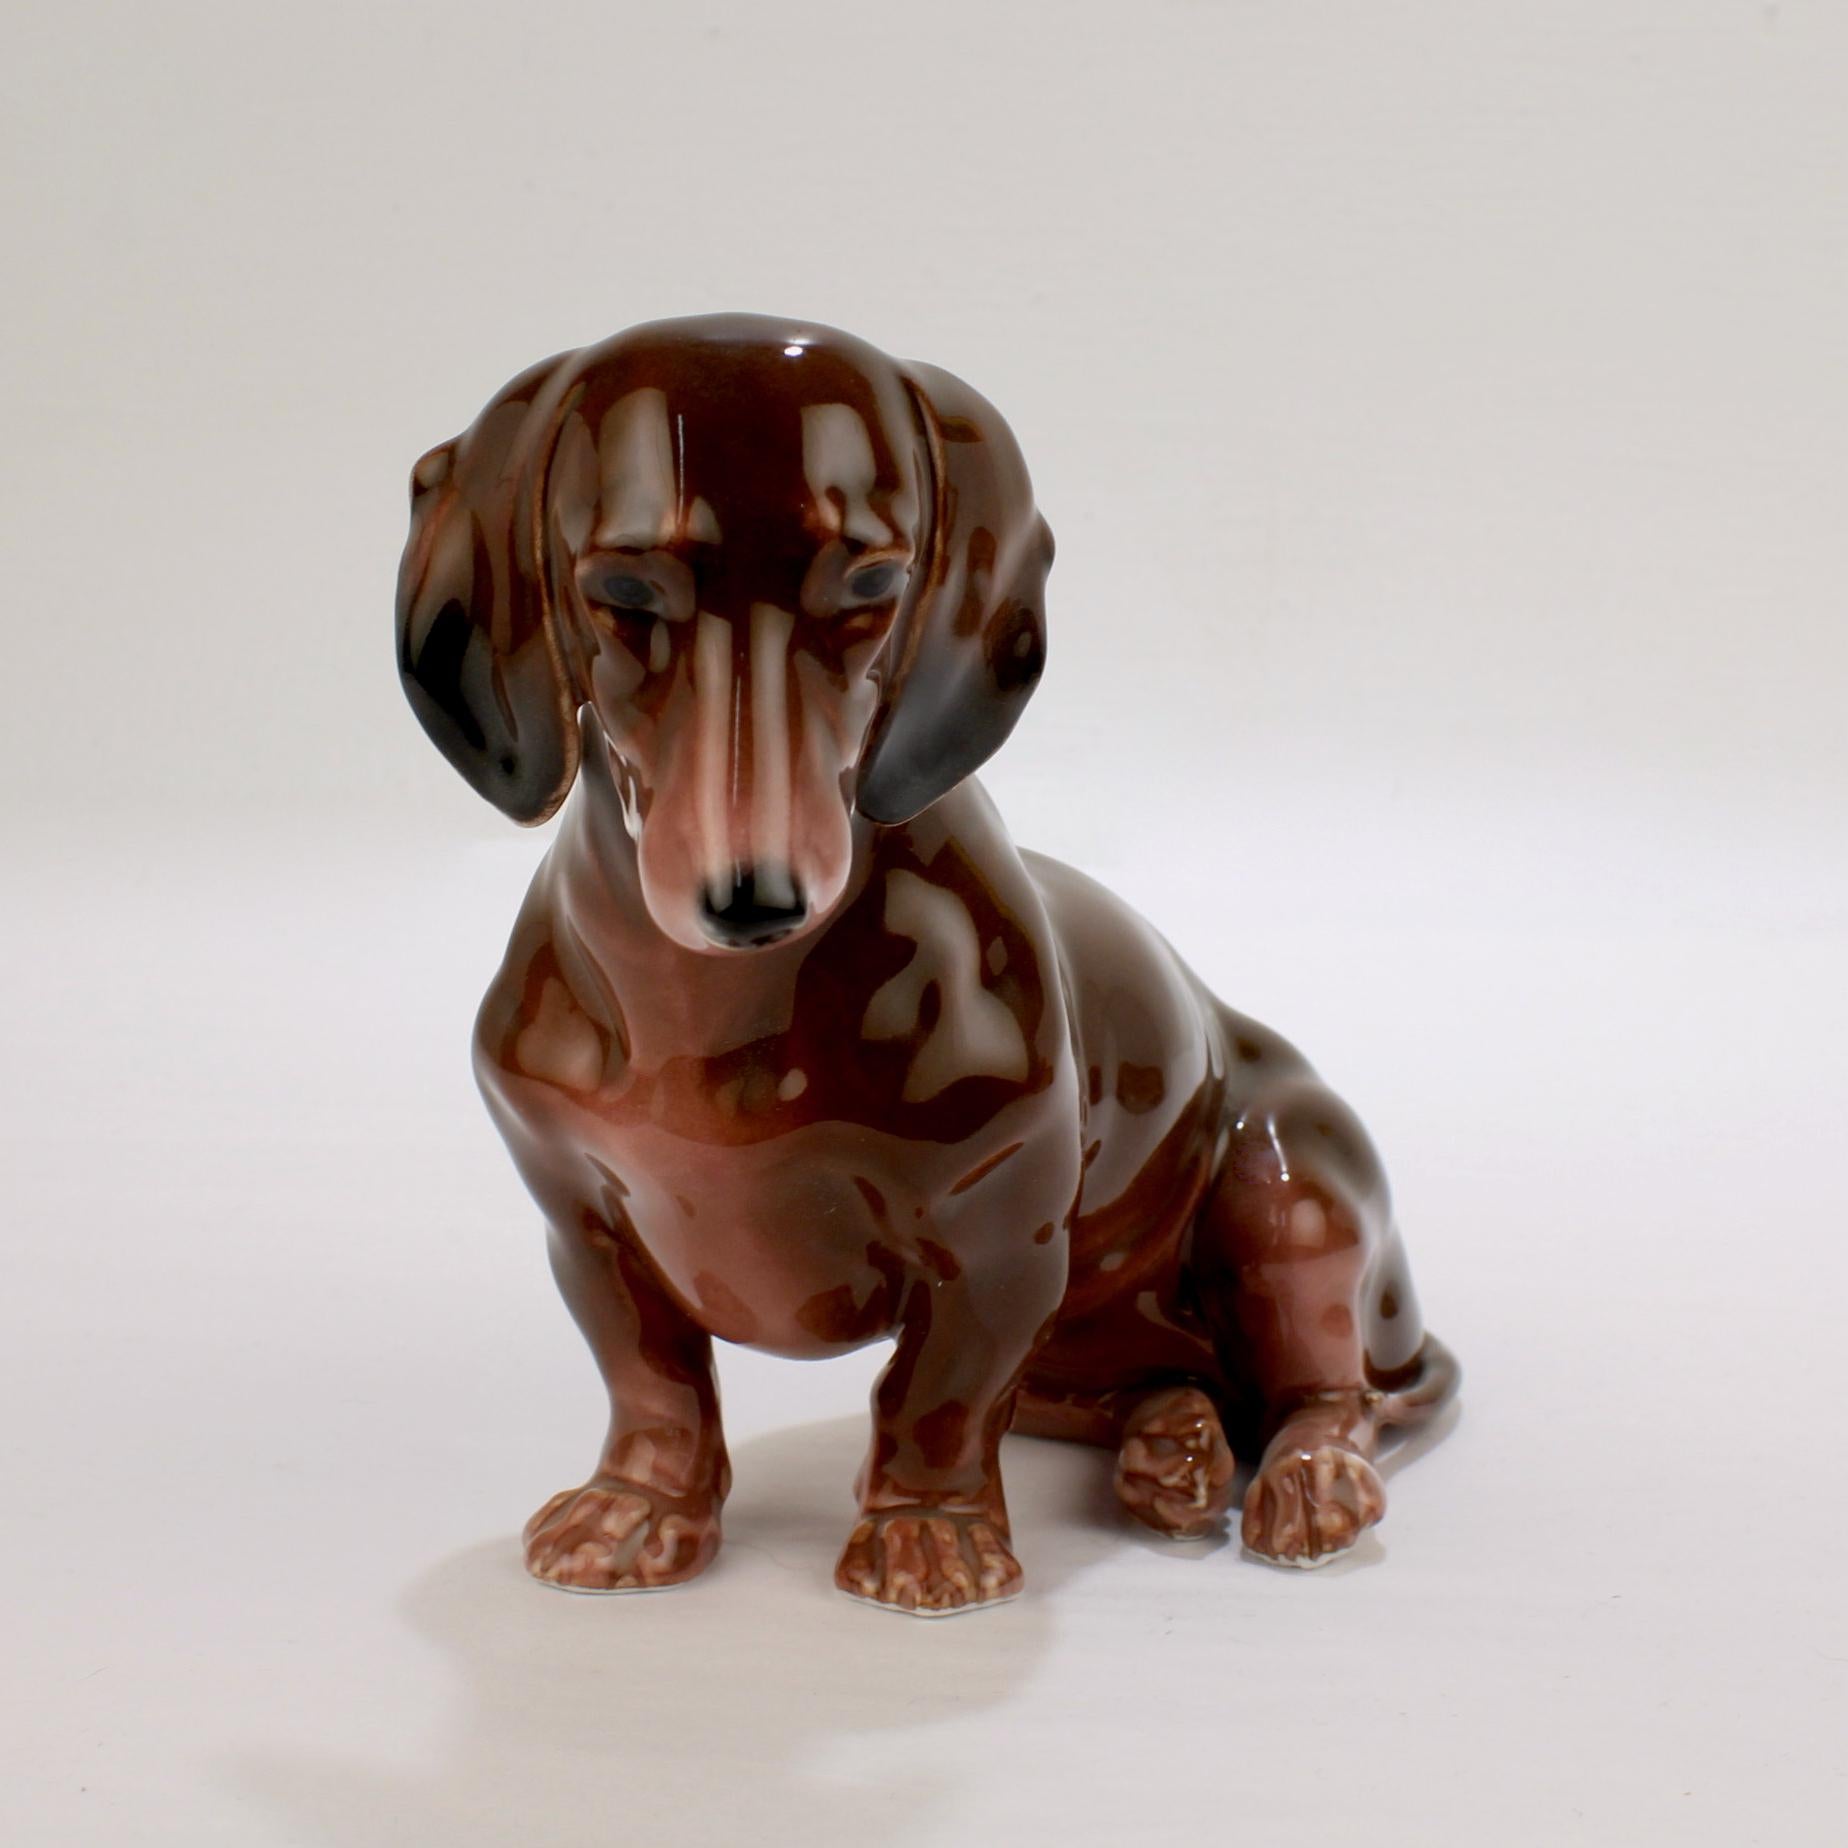 Offered here for your consideration is a wonderful Karl Ens porcelain figurine.

Modeled as a seated Dachshund dog. 

Decorated principally in brown tones with black and white features. 

Model no. 2578.

The Karl Ens factory was a